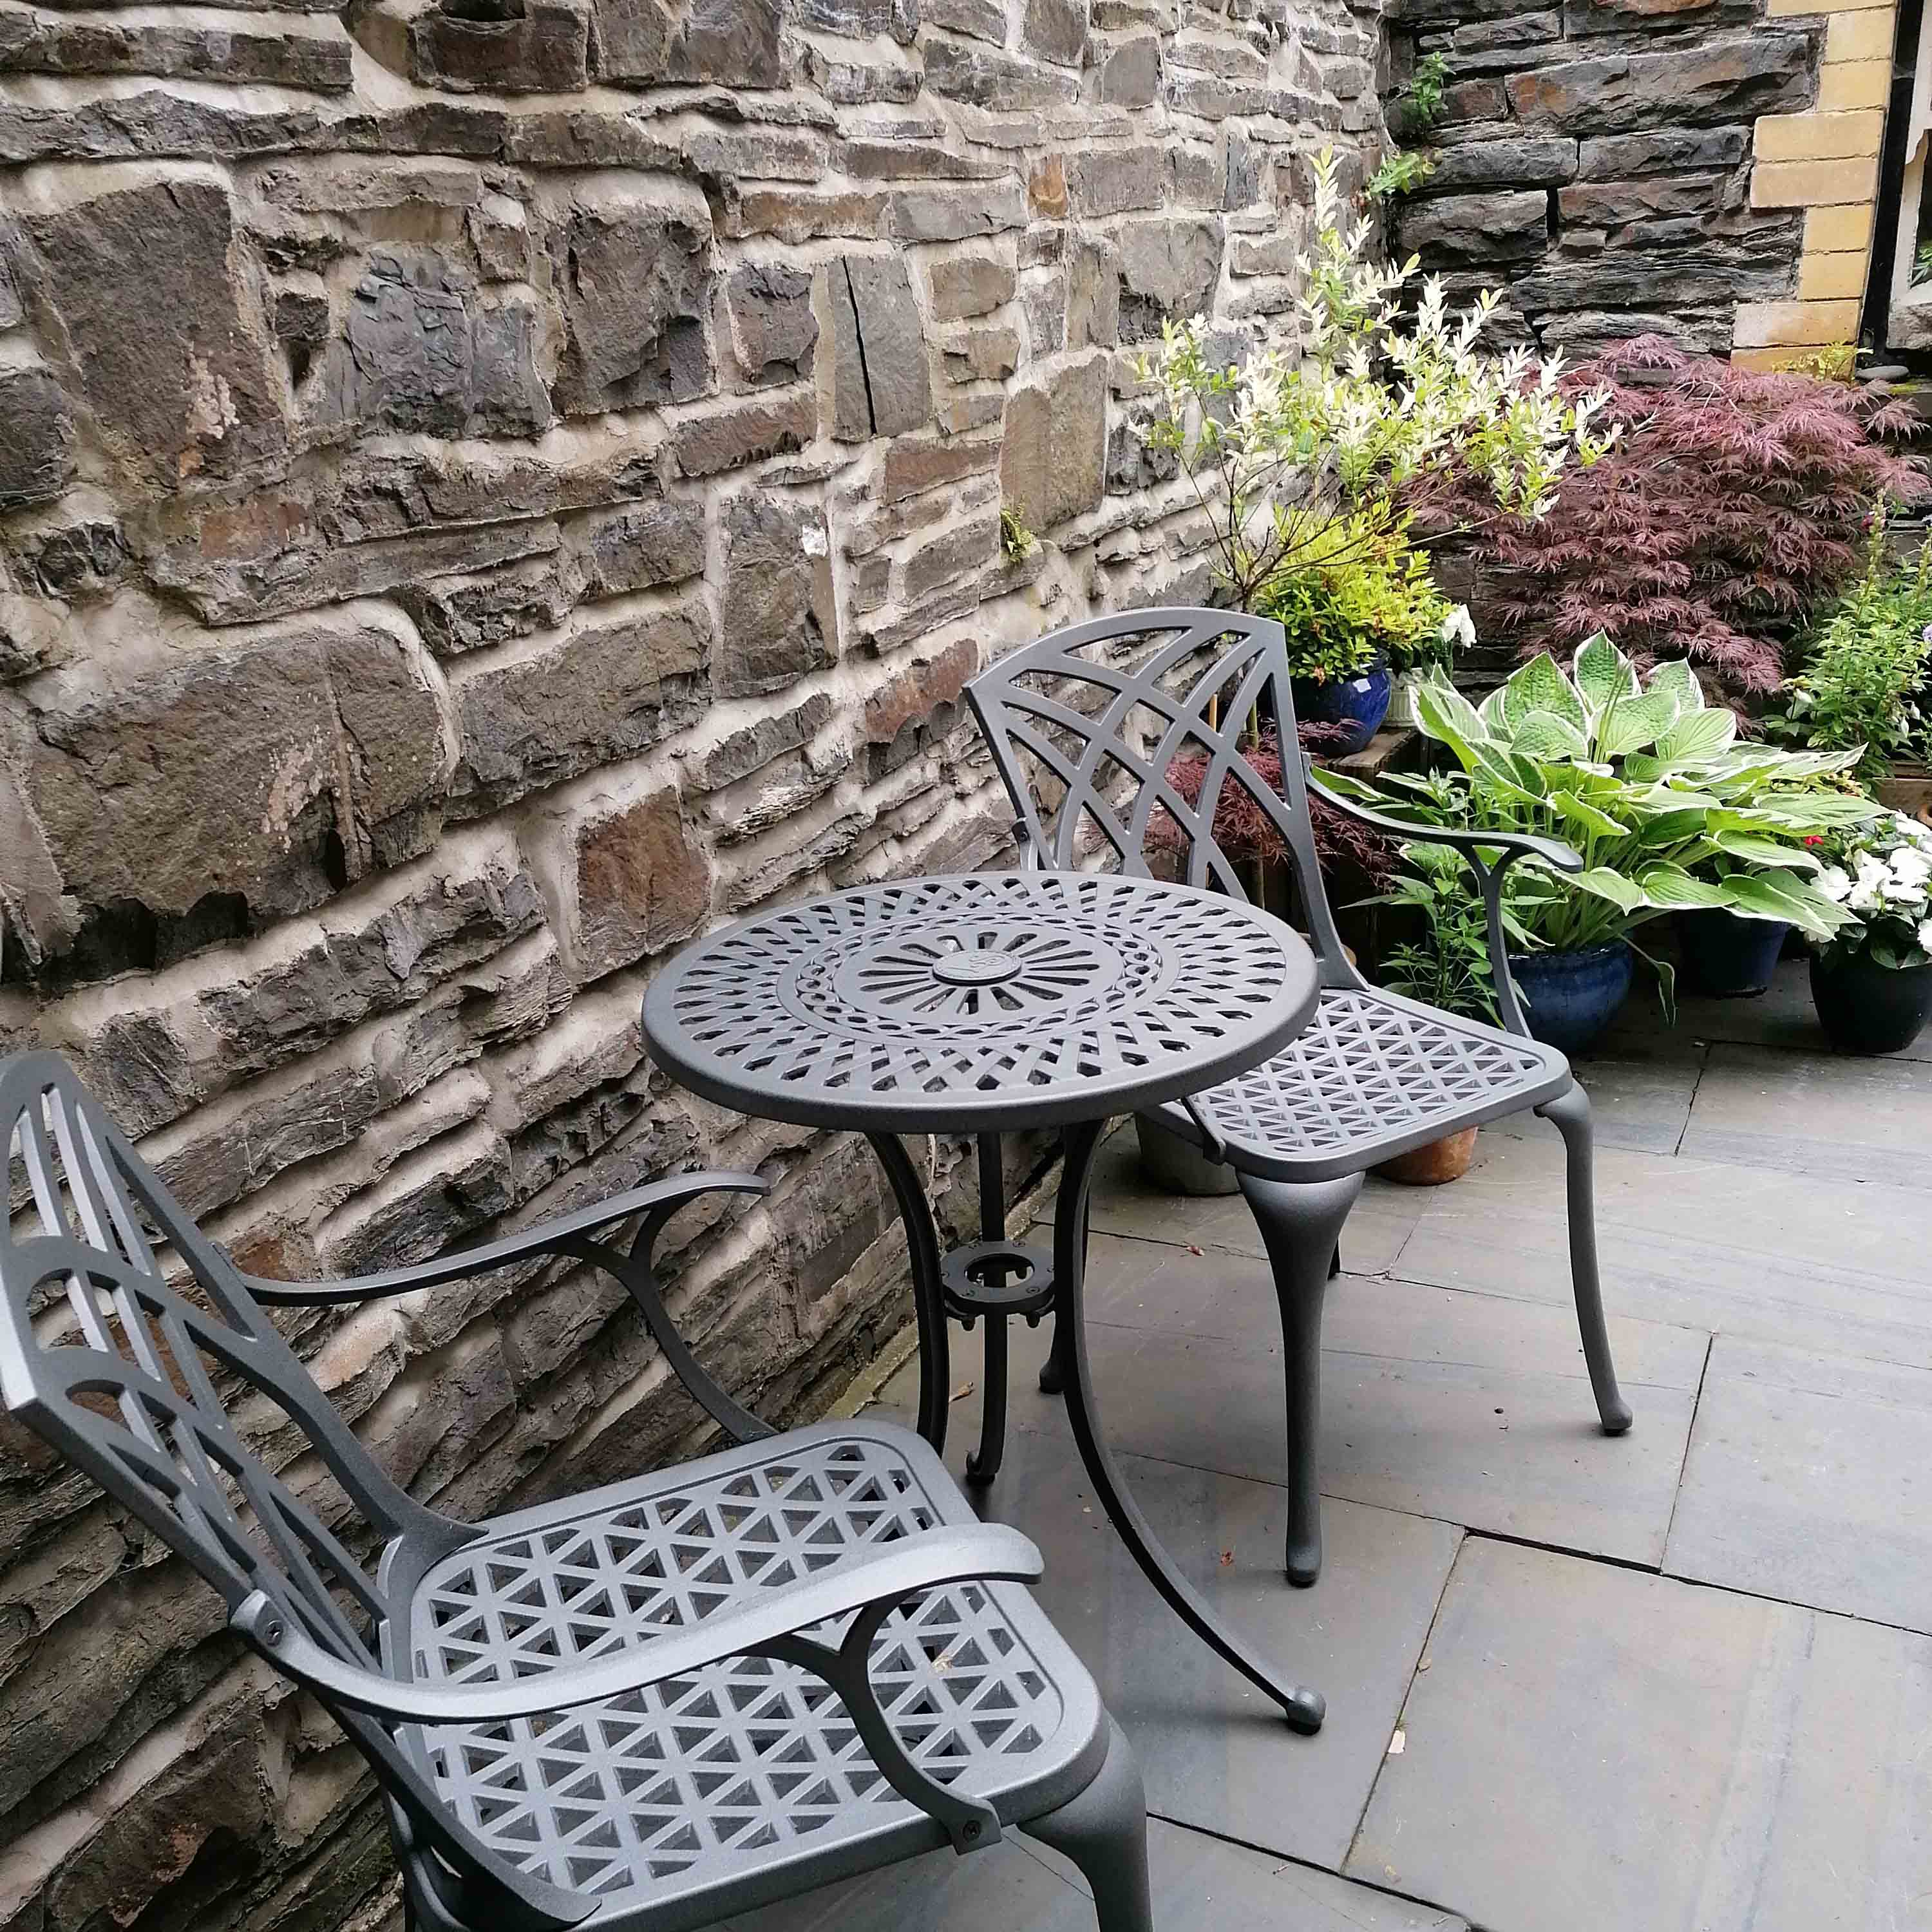 Add visual appeal with Eve small garden chairs and table